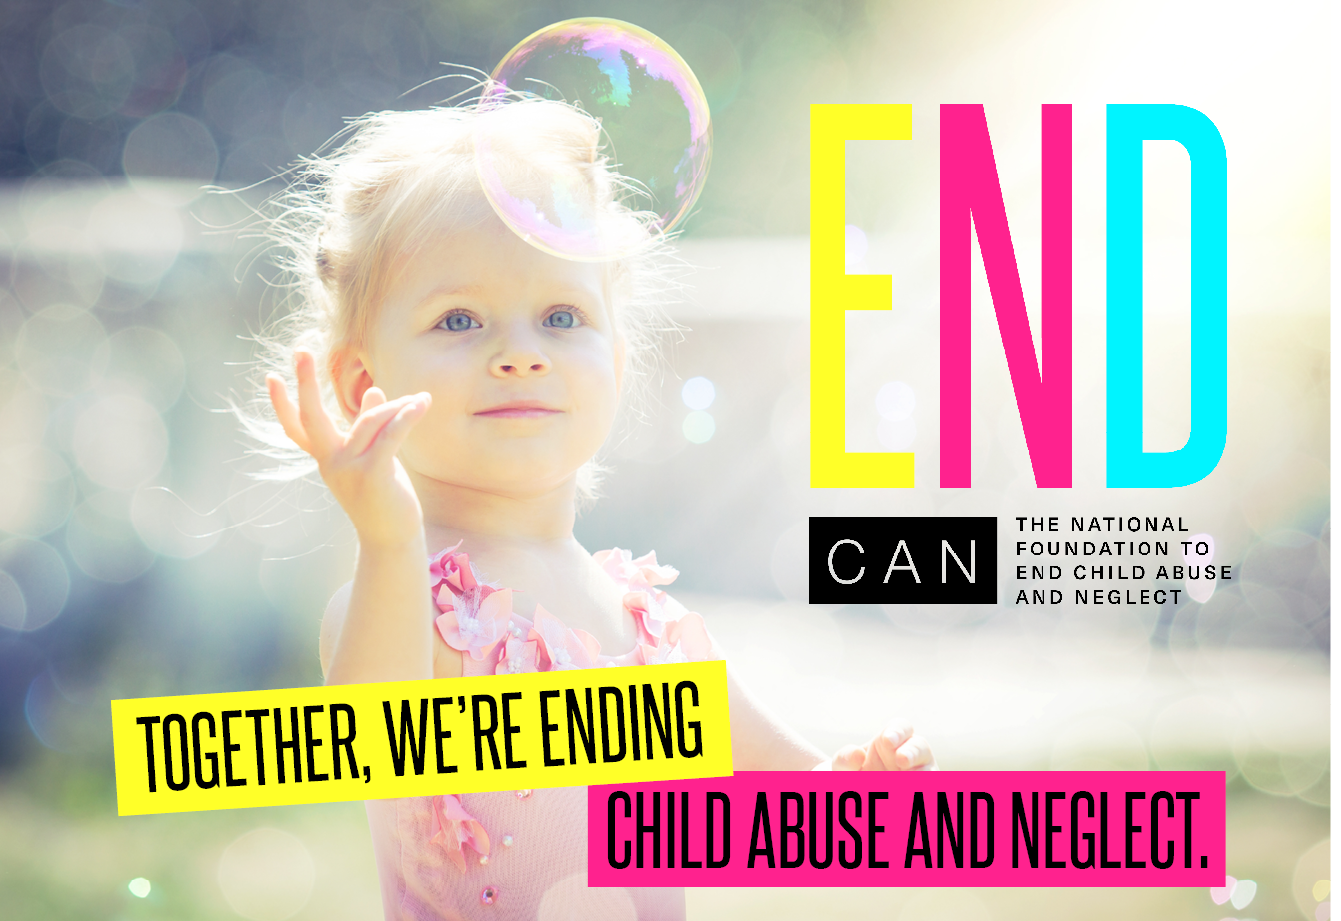 Together, we're ending child abuse and neglect.